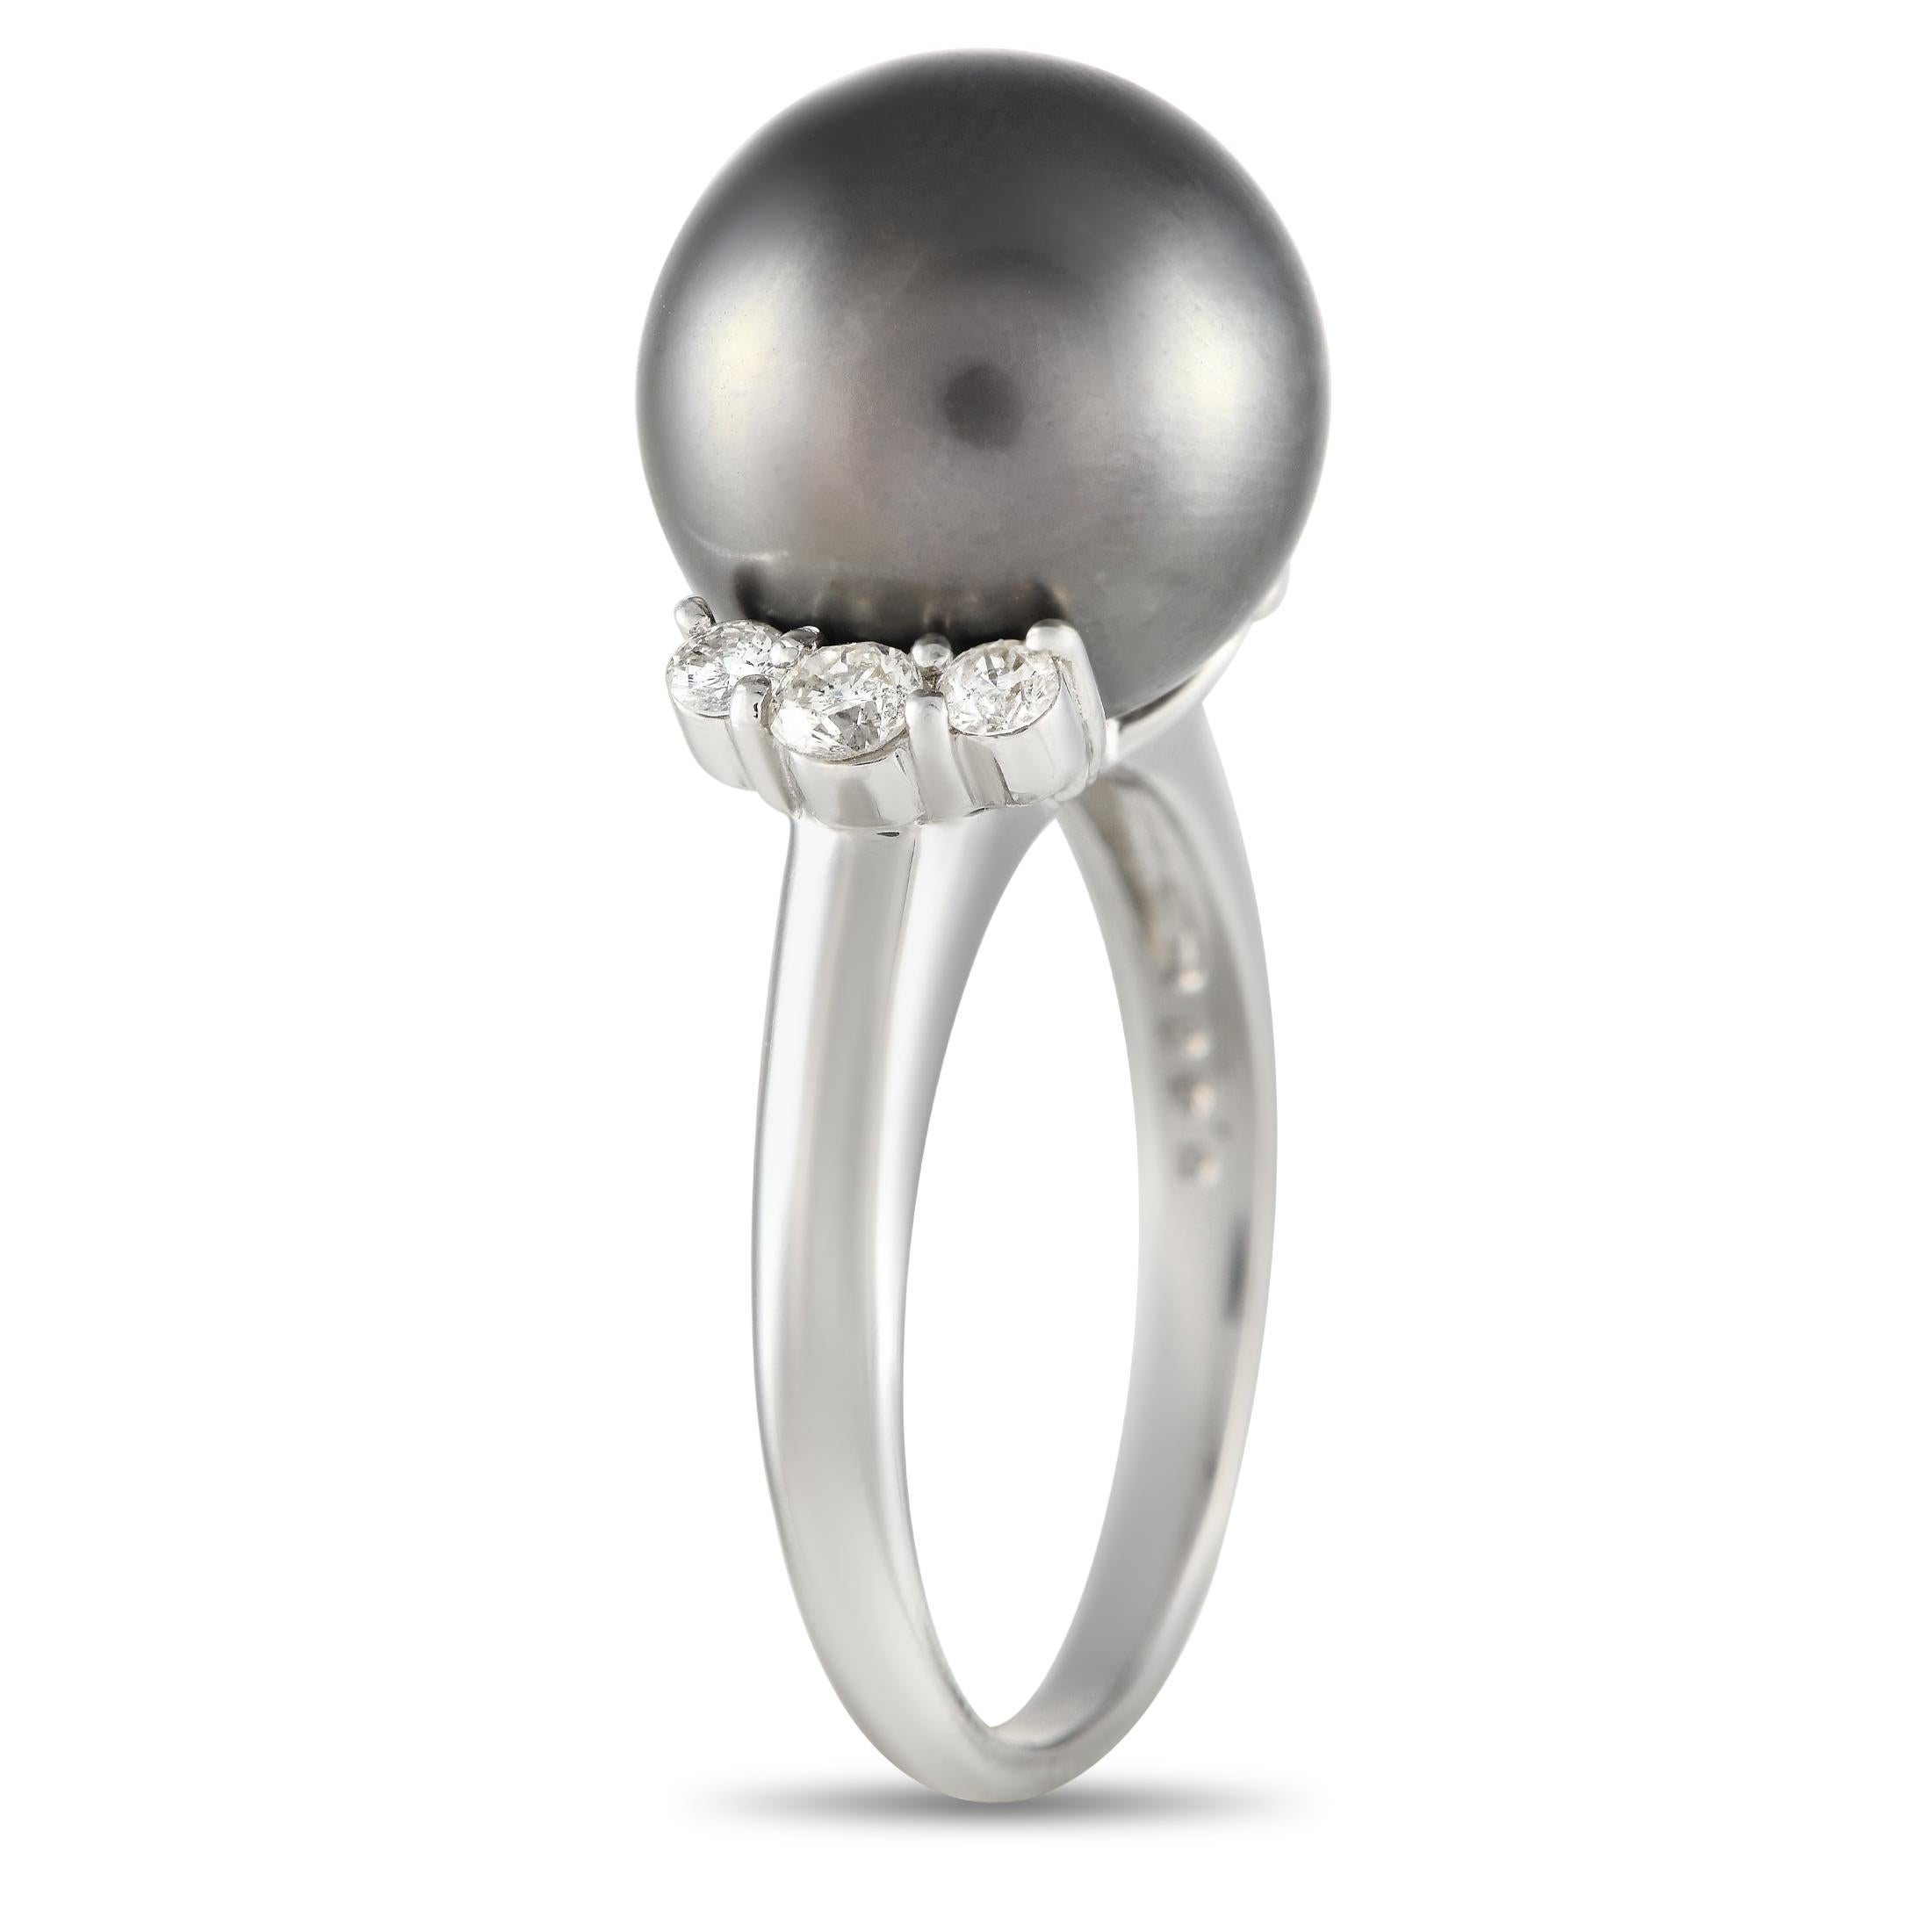 How incredibly majestic is this black pearl ring? It features a polished platinum band topped with a lustrous 11mm black pearl. A trio of diamonds sits on each side of the band, providing support for the imposing central gem. The ring's top